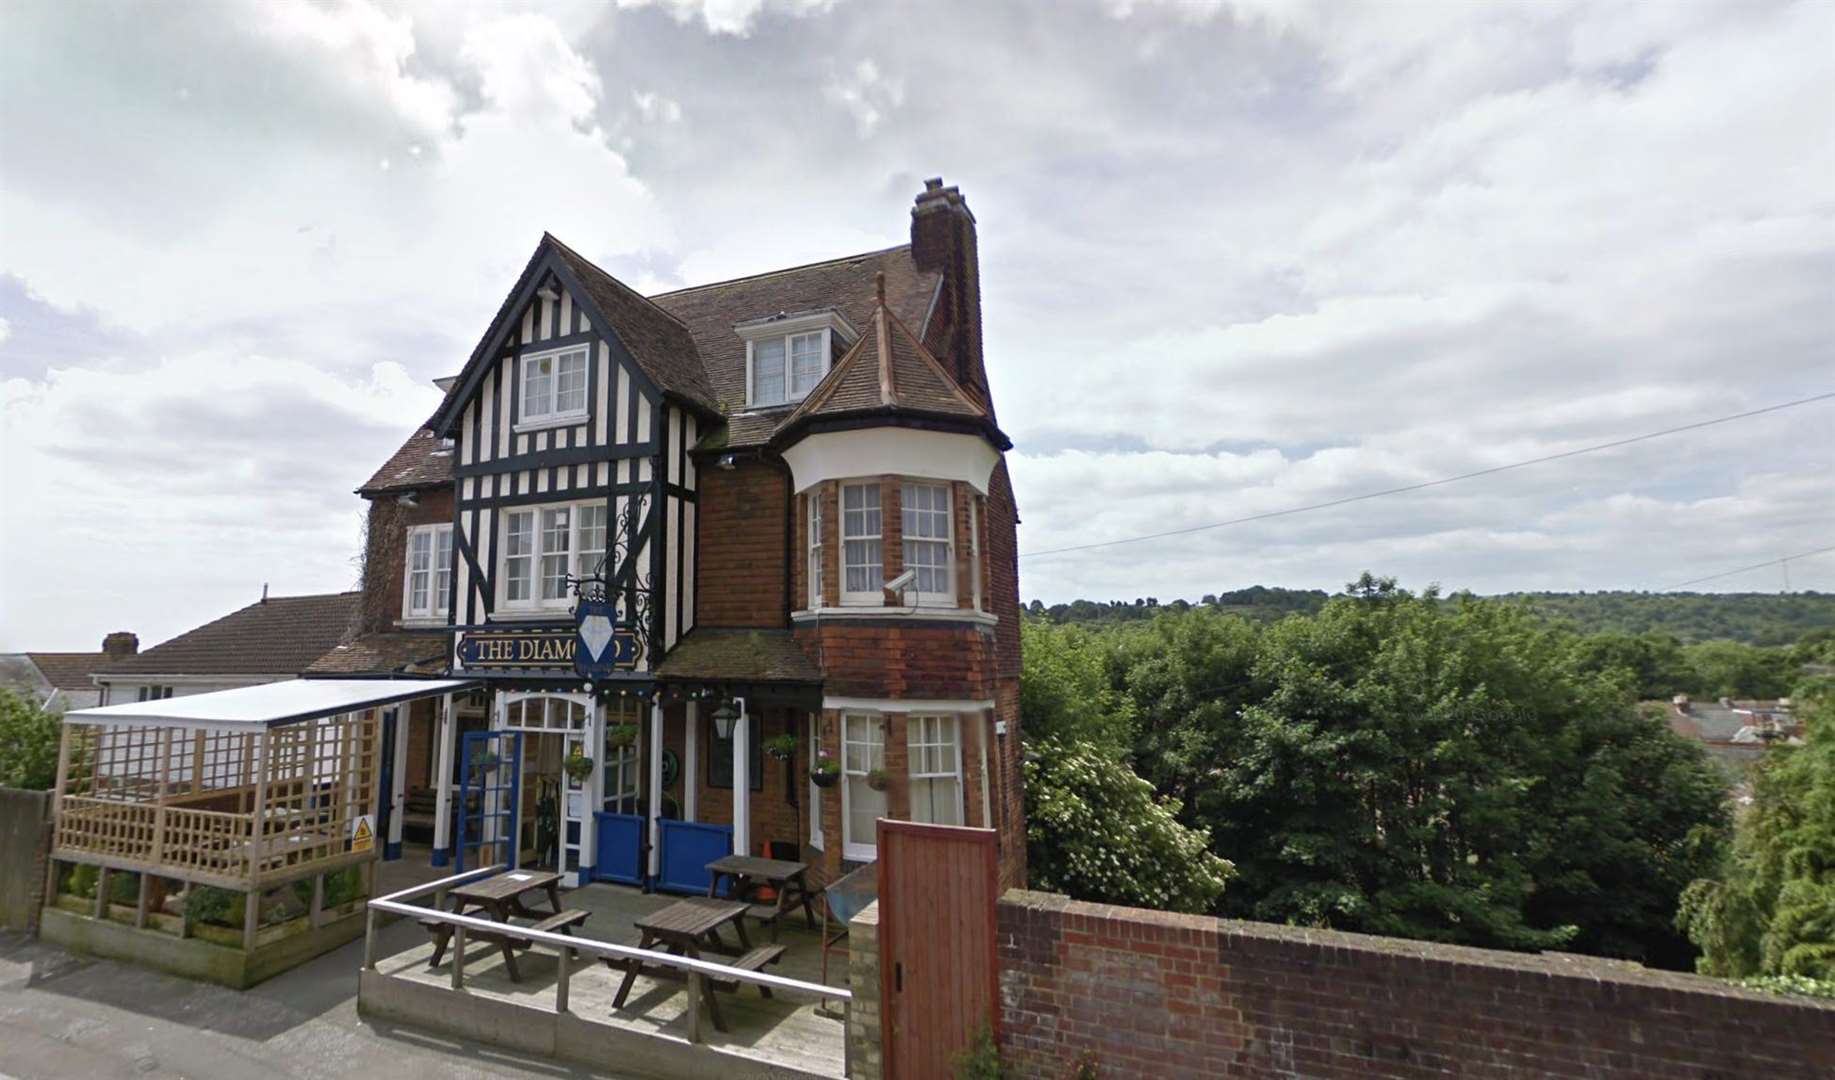 The Diamond in Dover has been listed for sale. Picture: Google